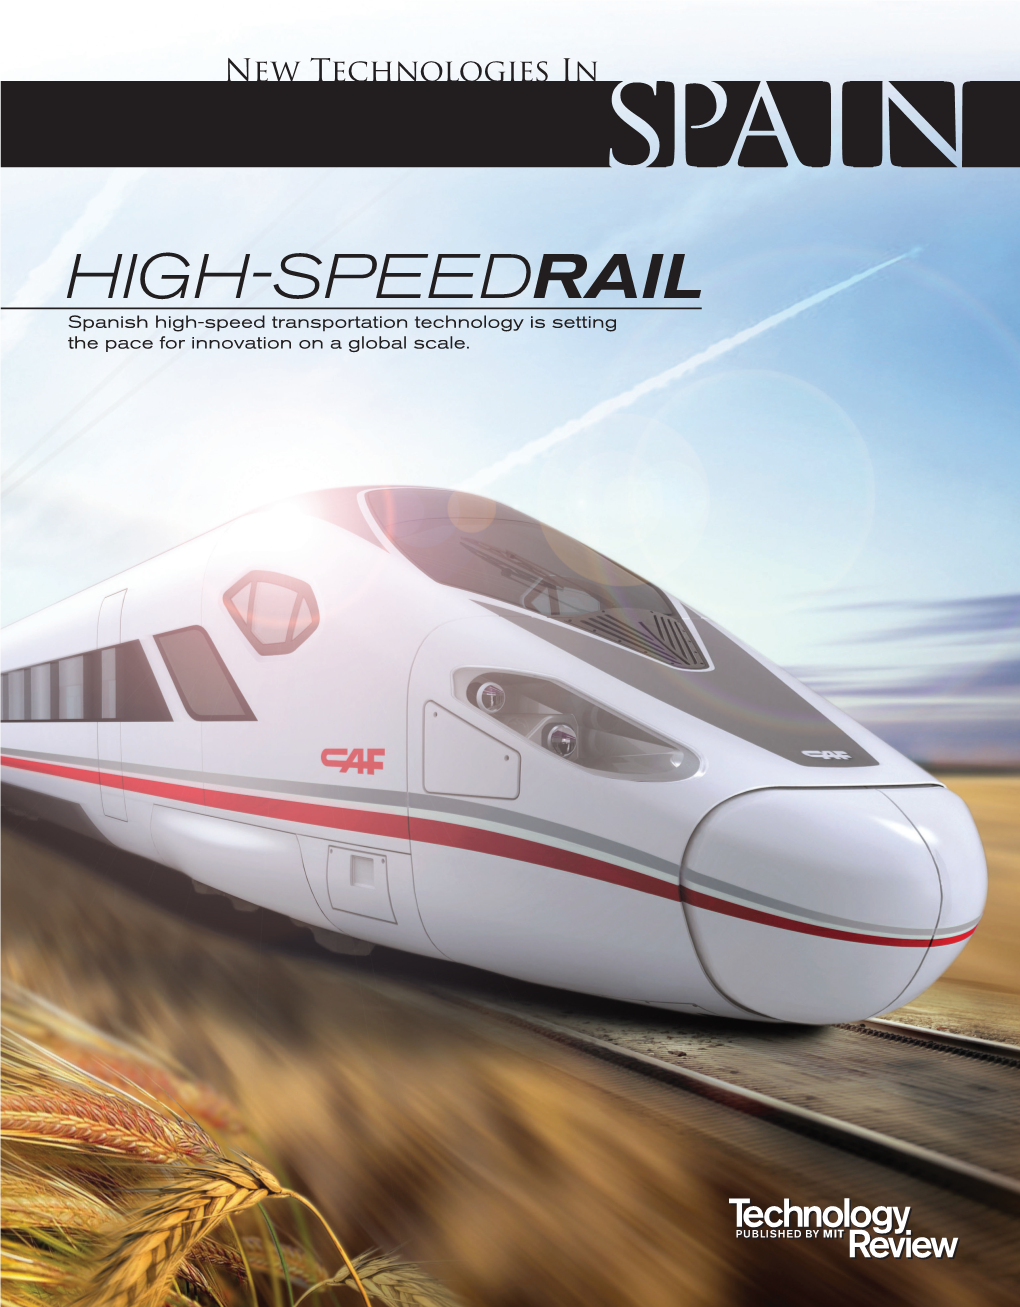 HIGH-SPEEDRAIL Spanish High-Speed Transportation Technology Is Setting the Pace for Innovation on a Global Scale